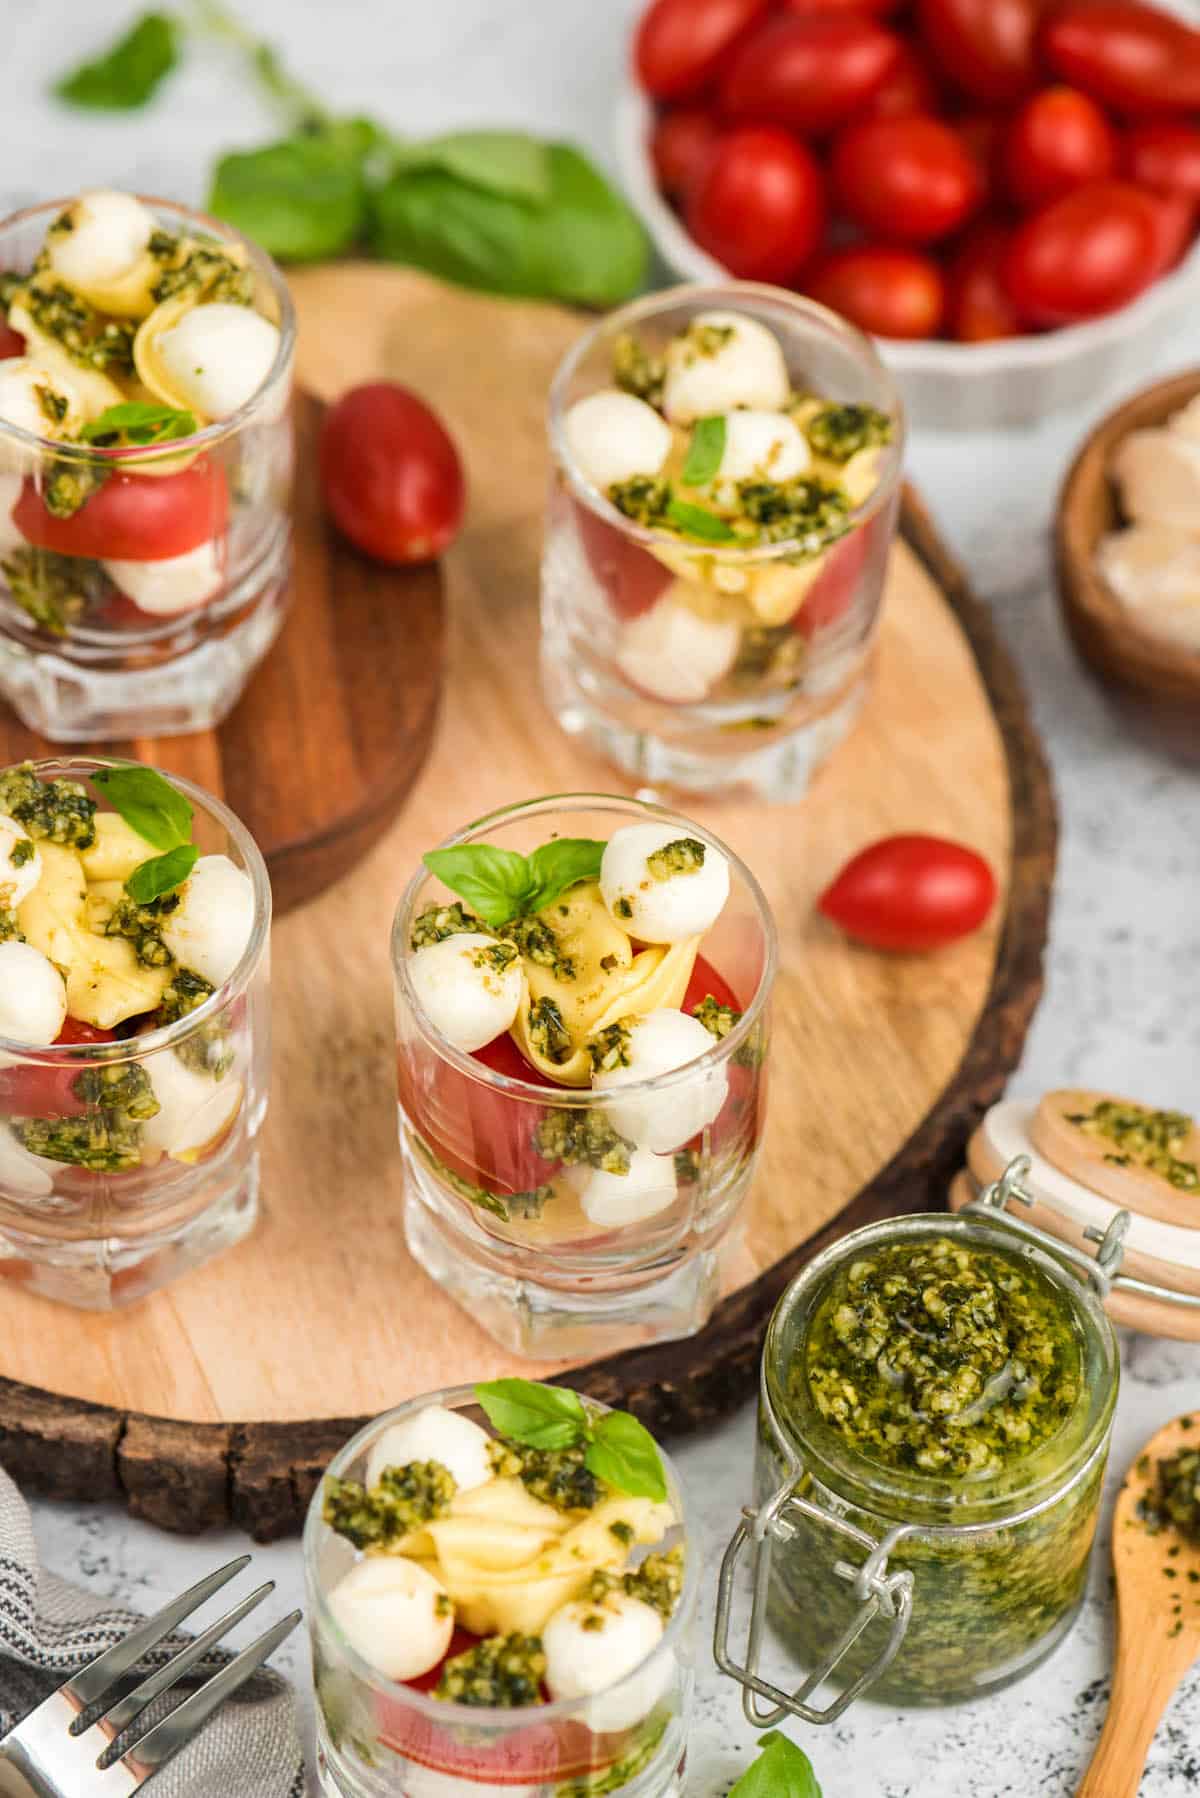 Tortellini Caprese salad cups on a wooden slab surrounded by fresh pesto.